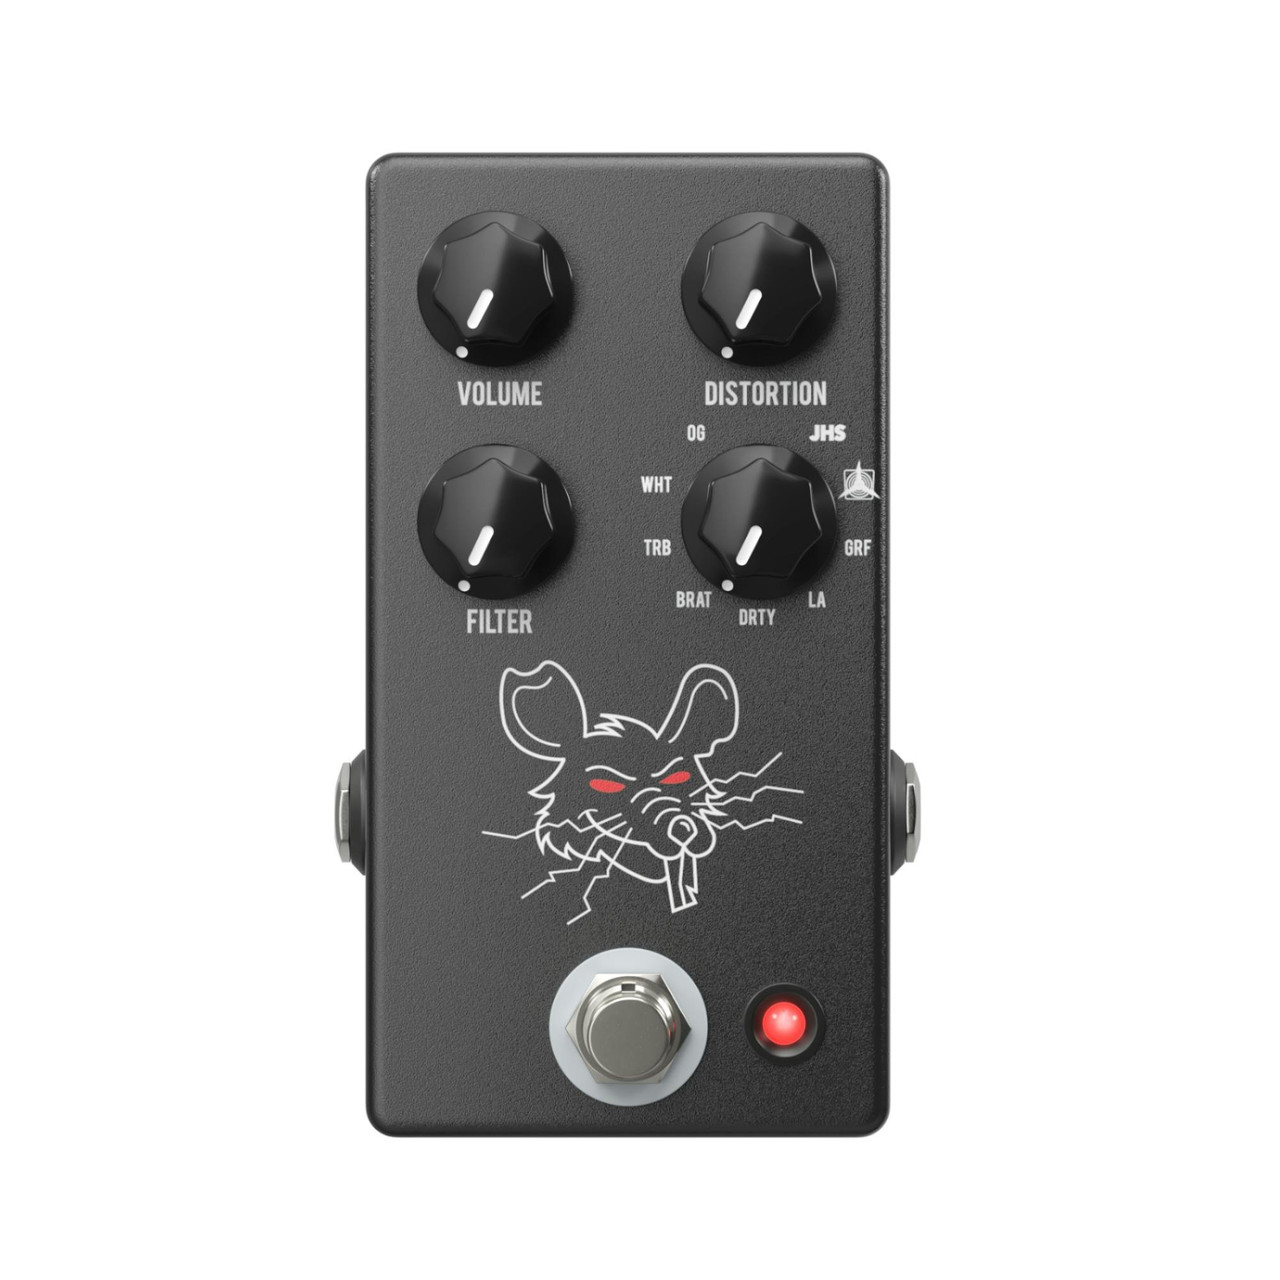 JHS Pedals Packrat 9 in 1 Rat Distortion Pedal